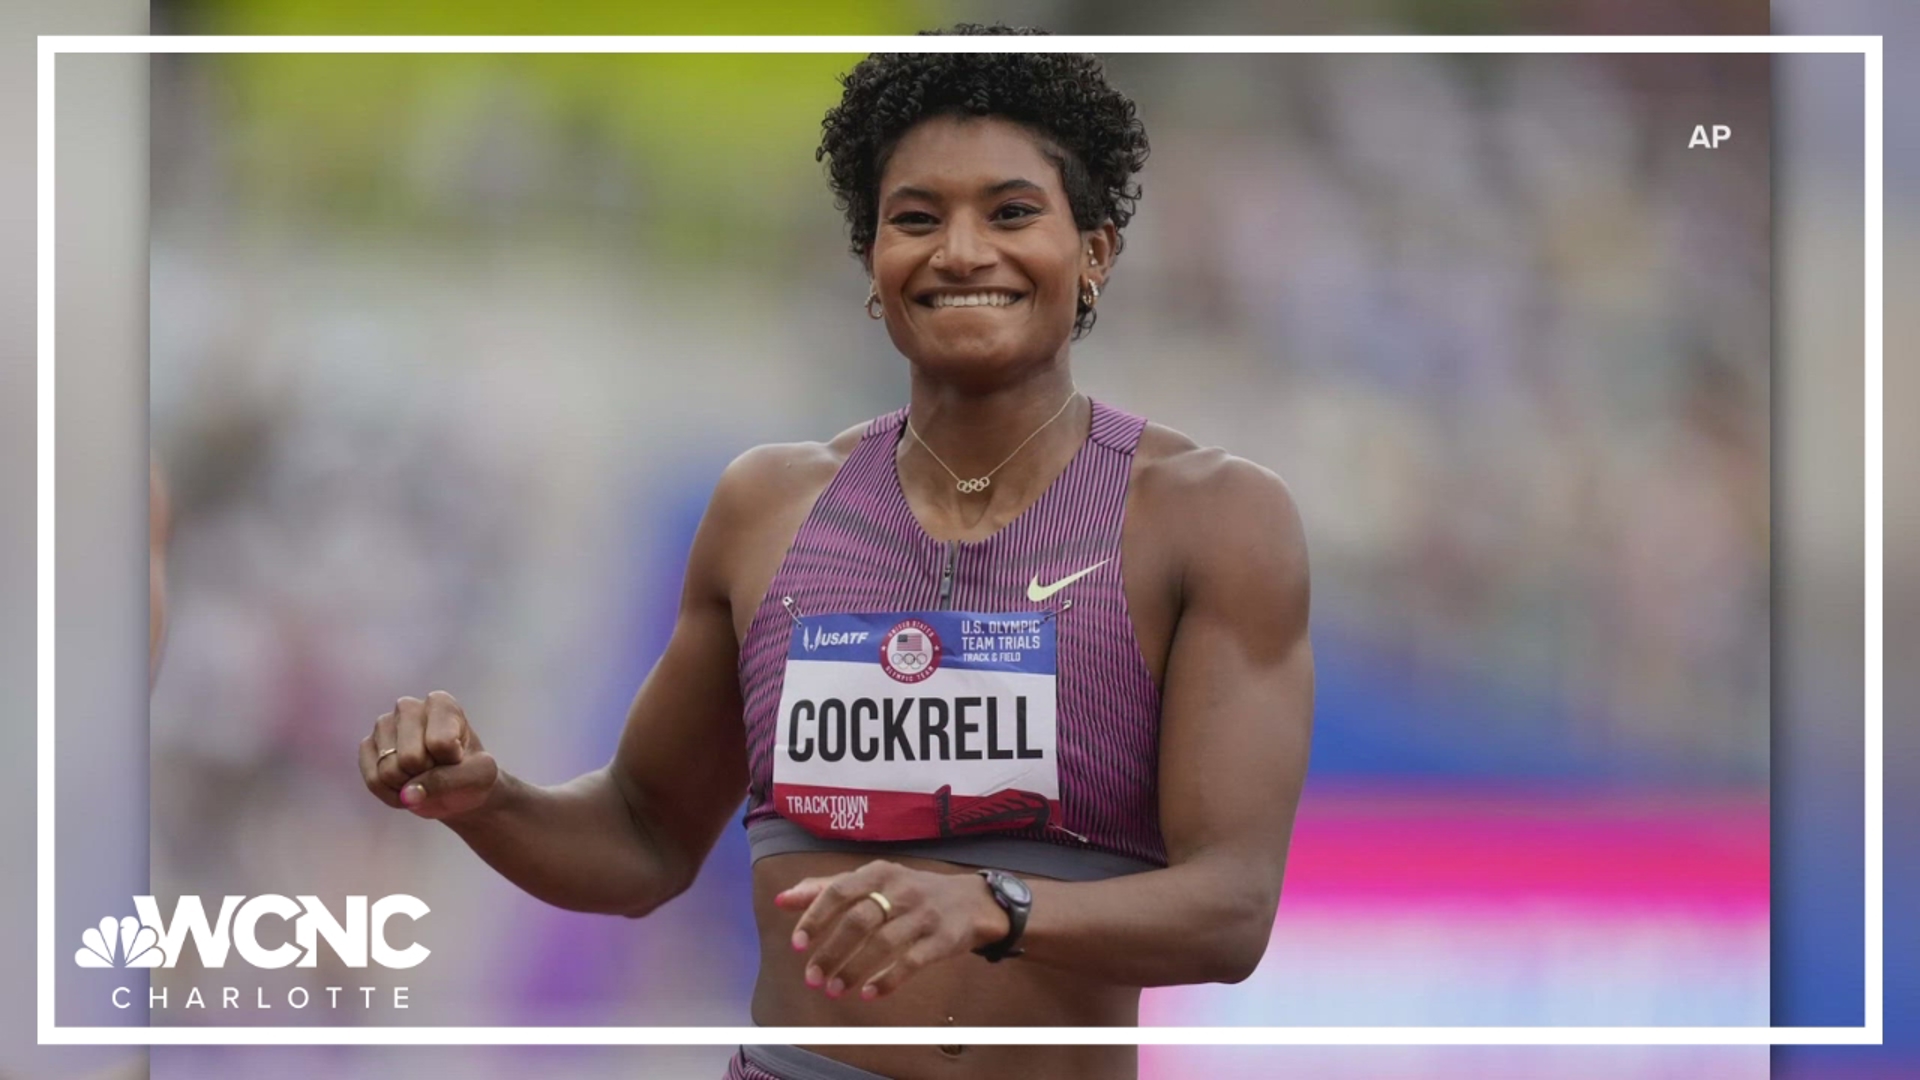 Anna Cockrell took second in the 400 meter hurdles Sunday night. This will be her second trip to the Olympics, after placing 8th in the 400 meter hurdles in 2020.